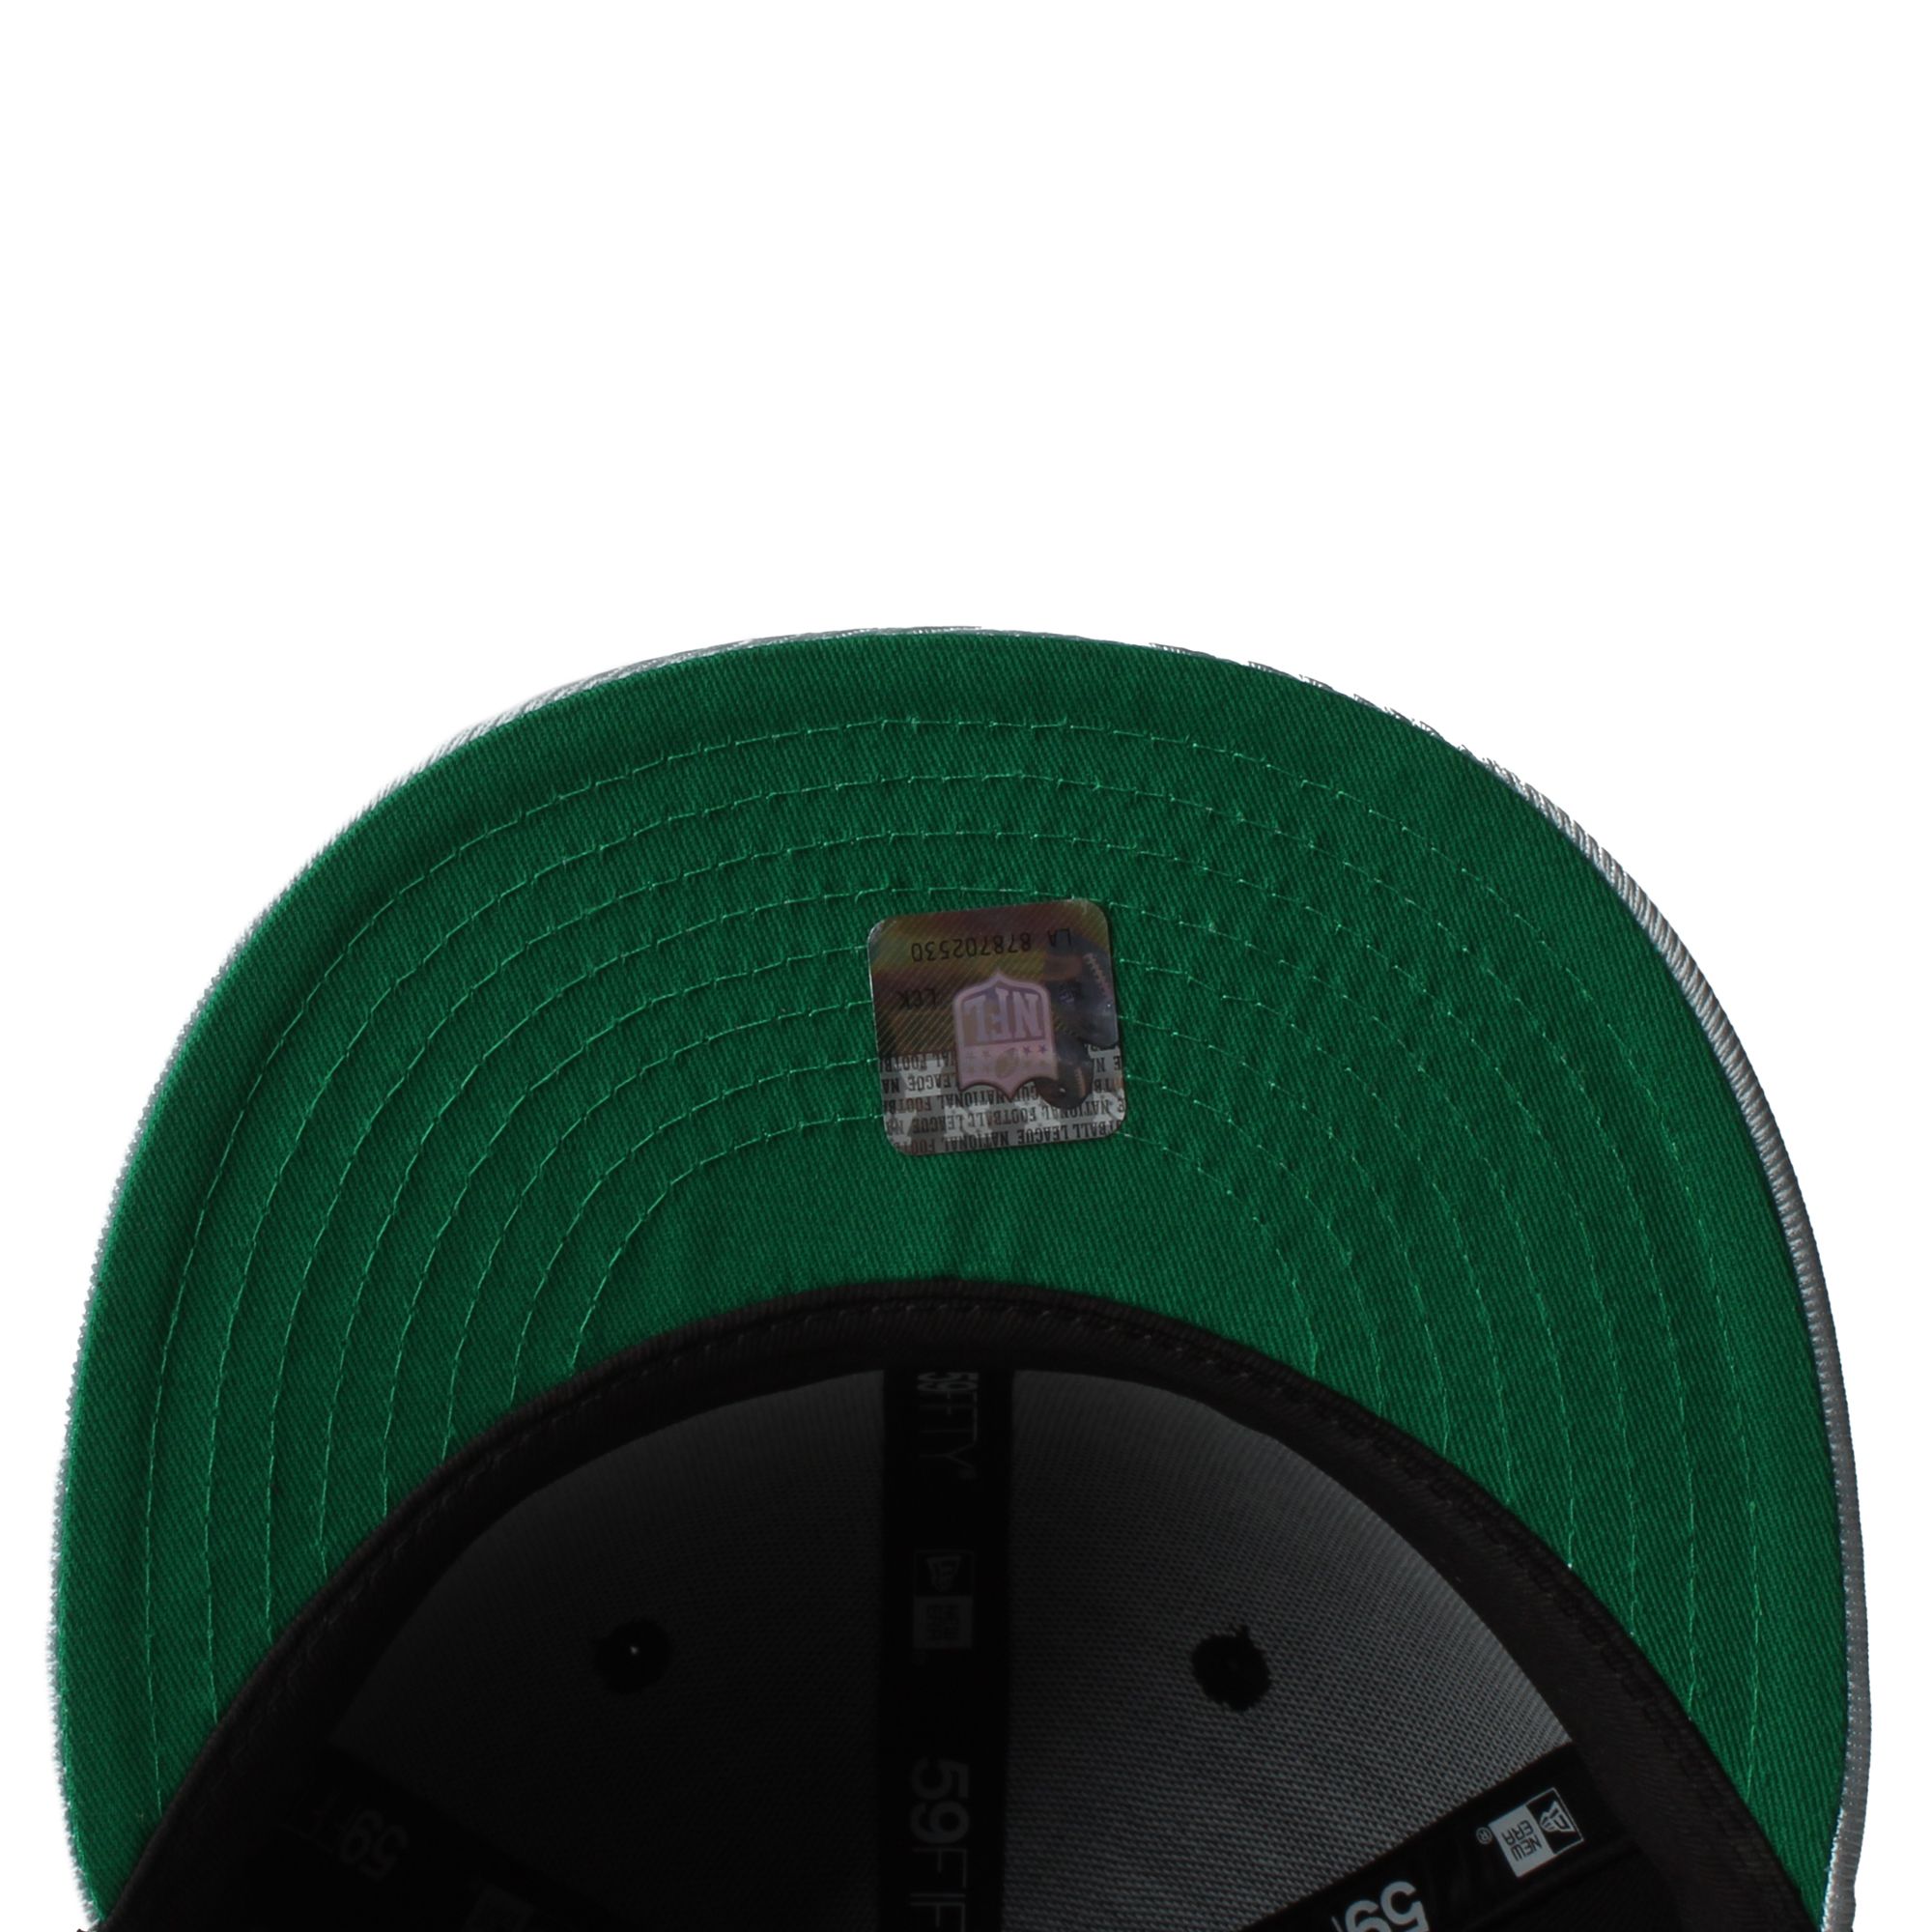 Compton New Era 59fifty Fitted Hat (Black Green Under Brim) - Green Bottom  Raiders New Era Fitted Caps - Green Under Visor Straight Outta Compton  Fitteds – ECAPCITY